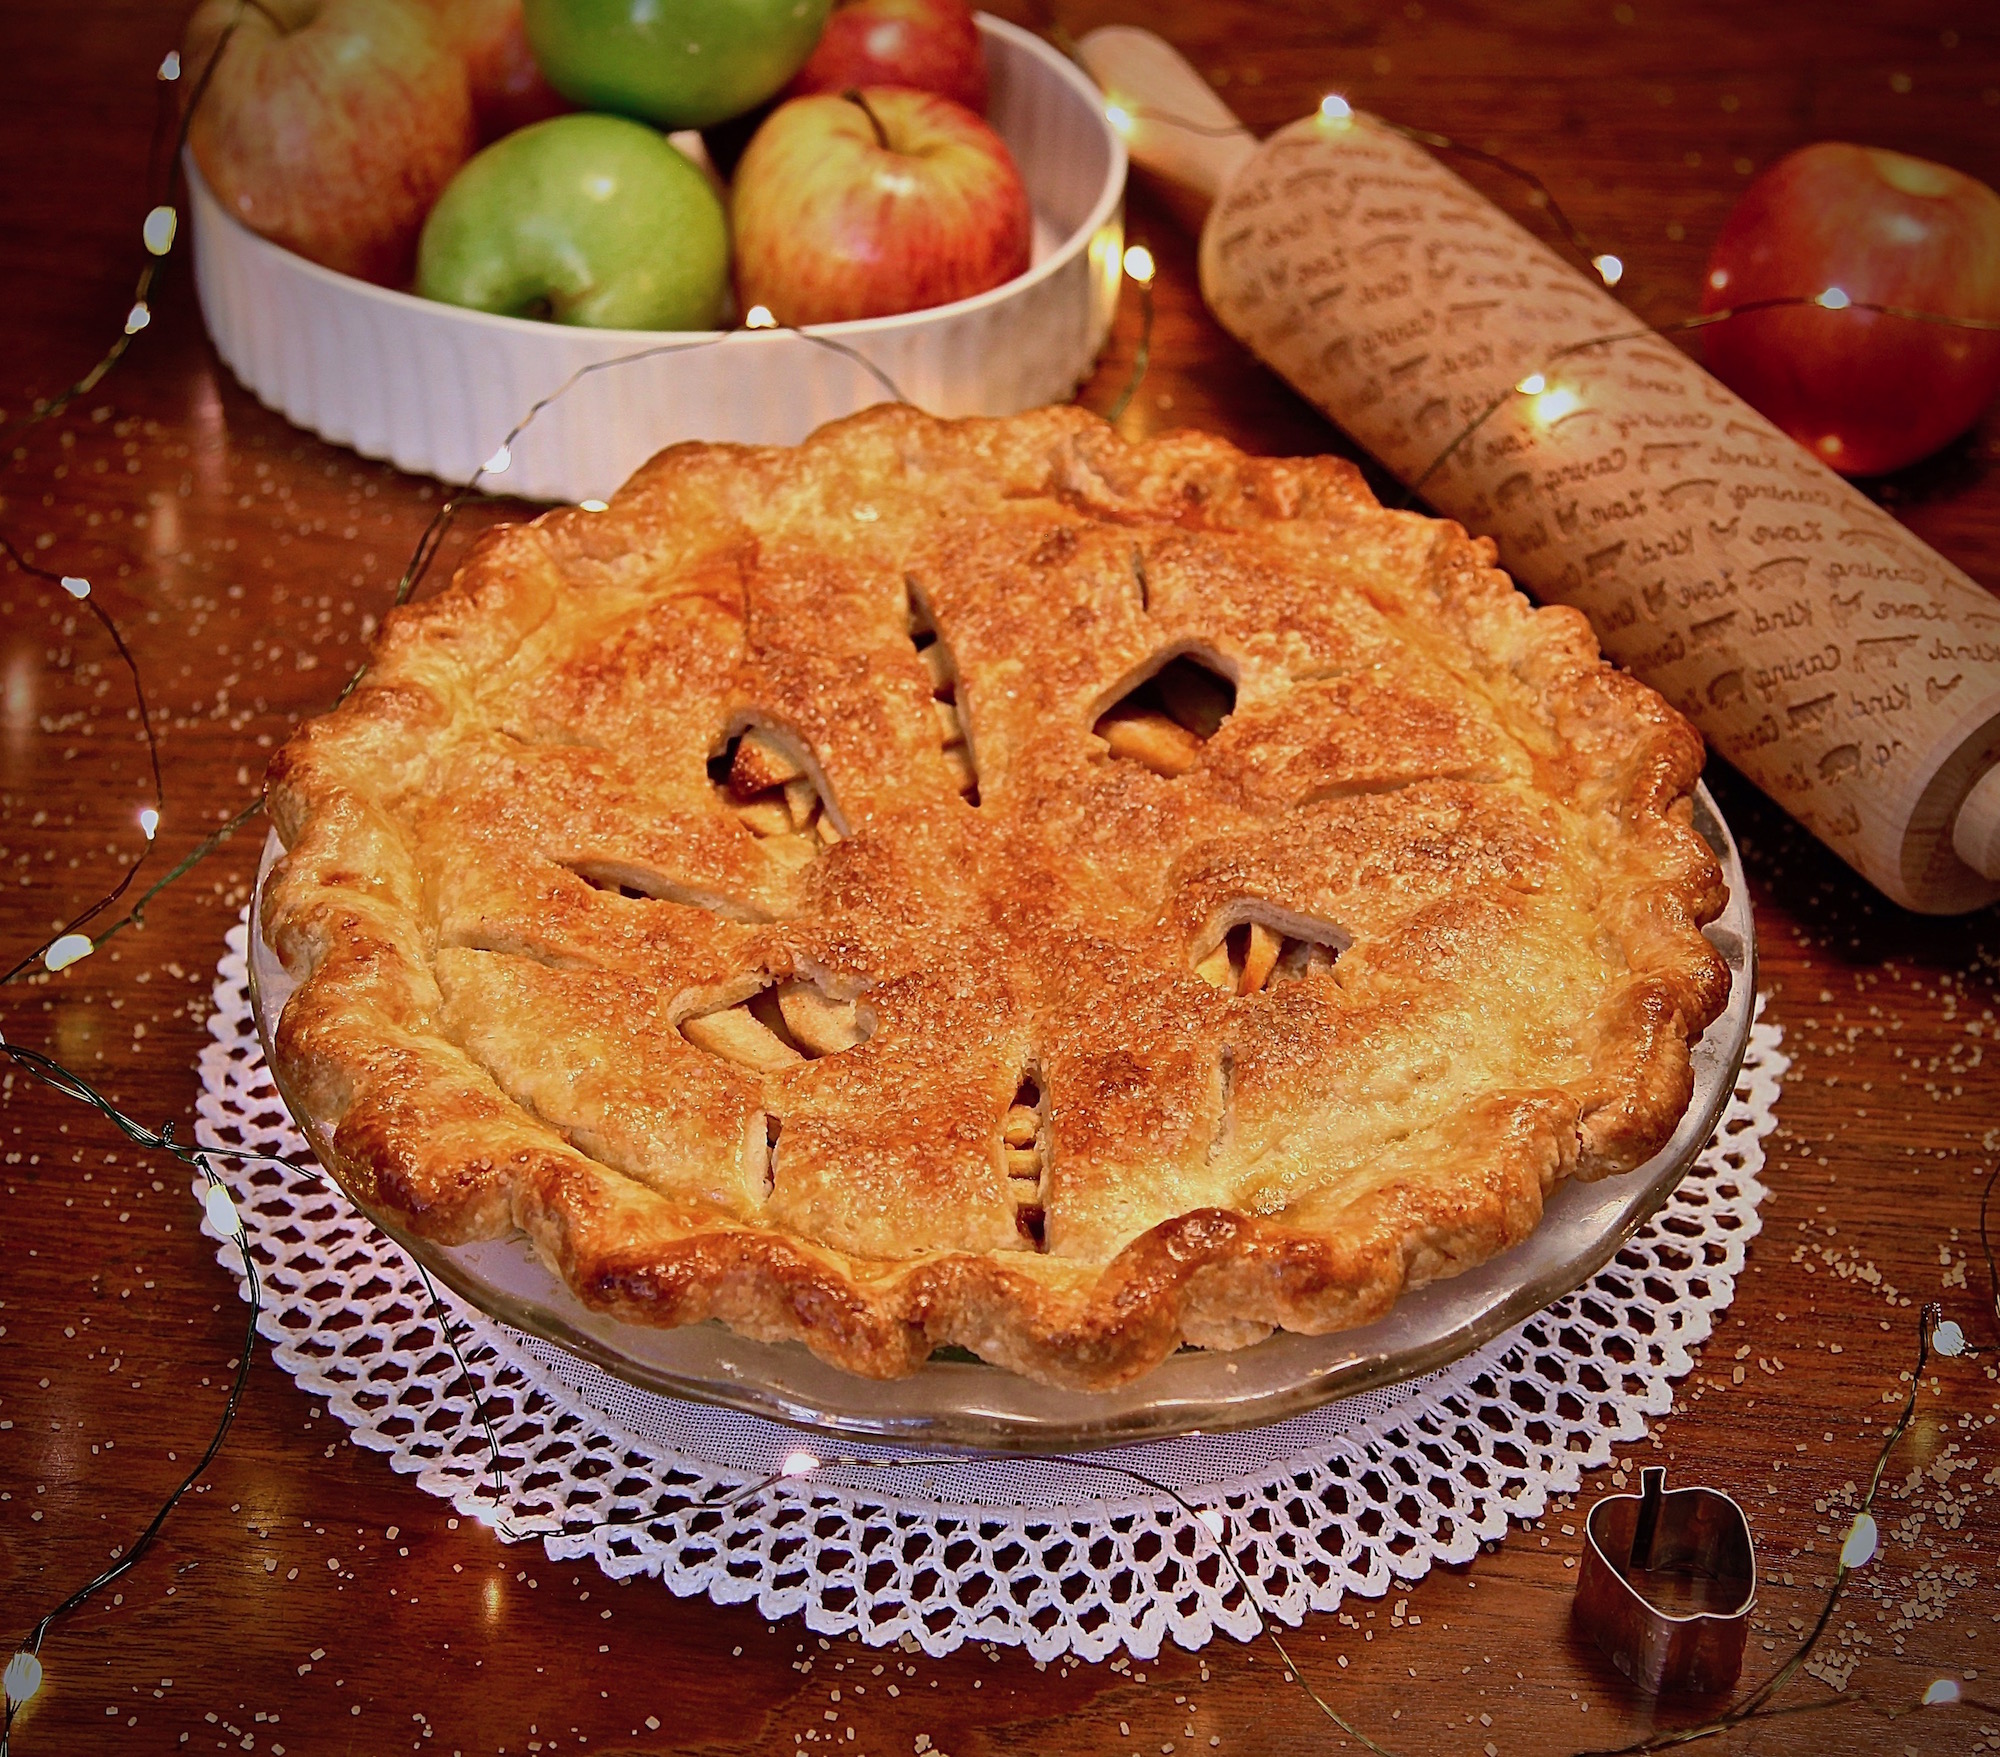 Holidays are not complete without a double crusted apple pie